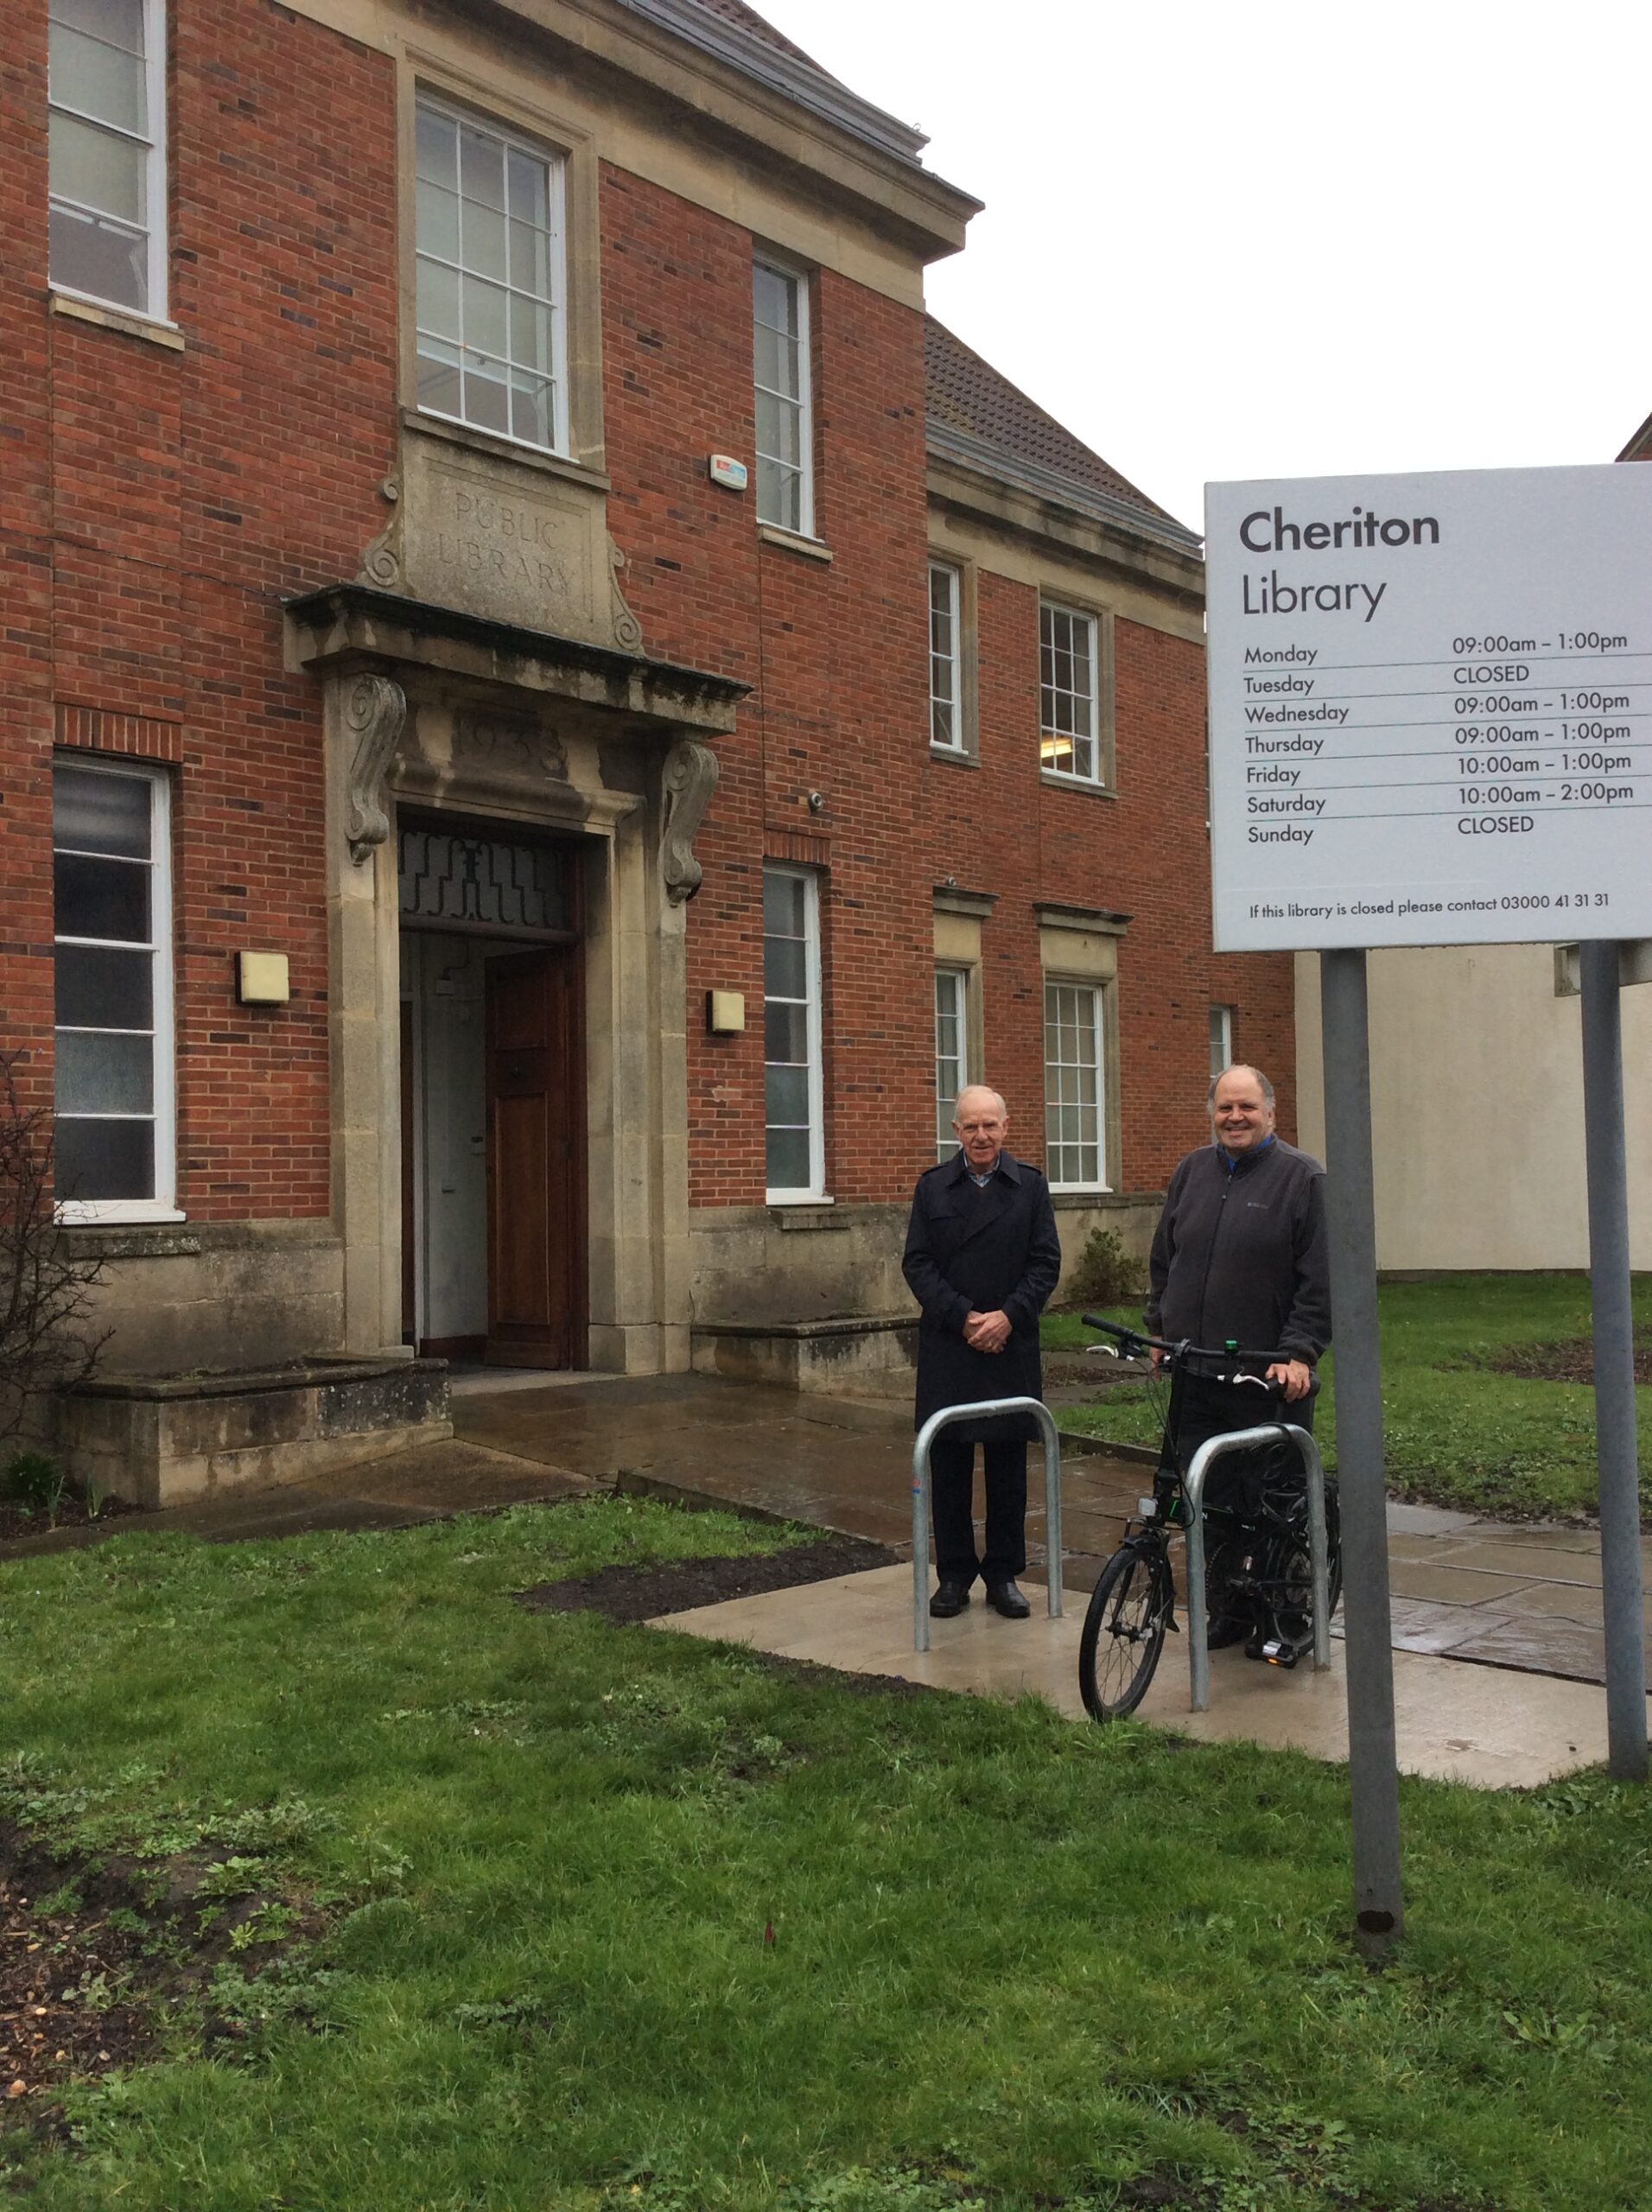 Cllrs John Collier on the left an Peter Gane on the right who funded installation of Cycle stands at Cheriton Library